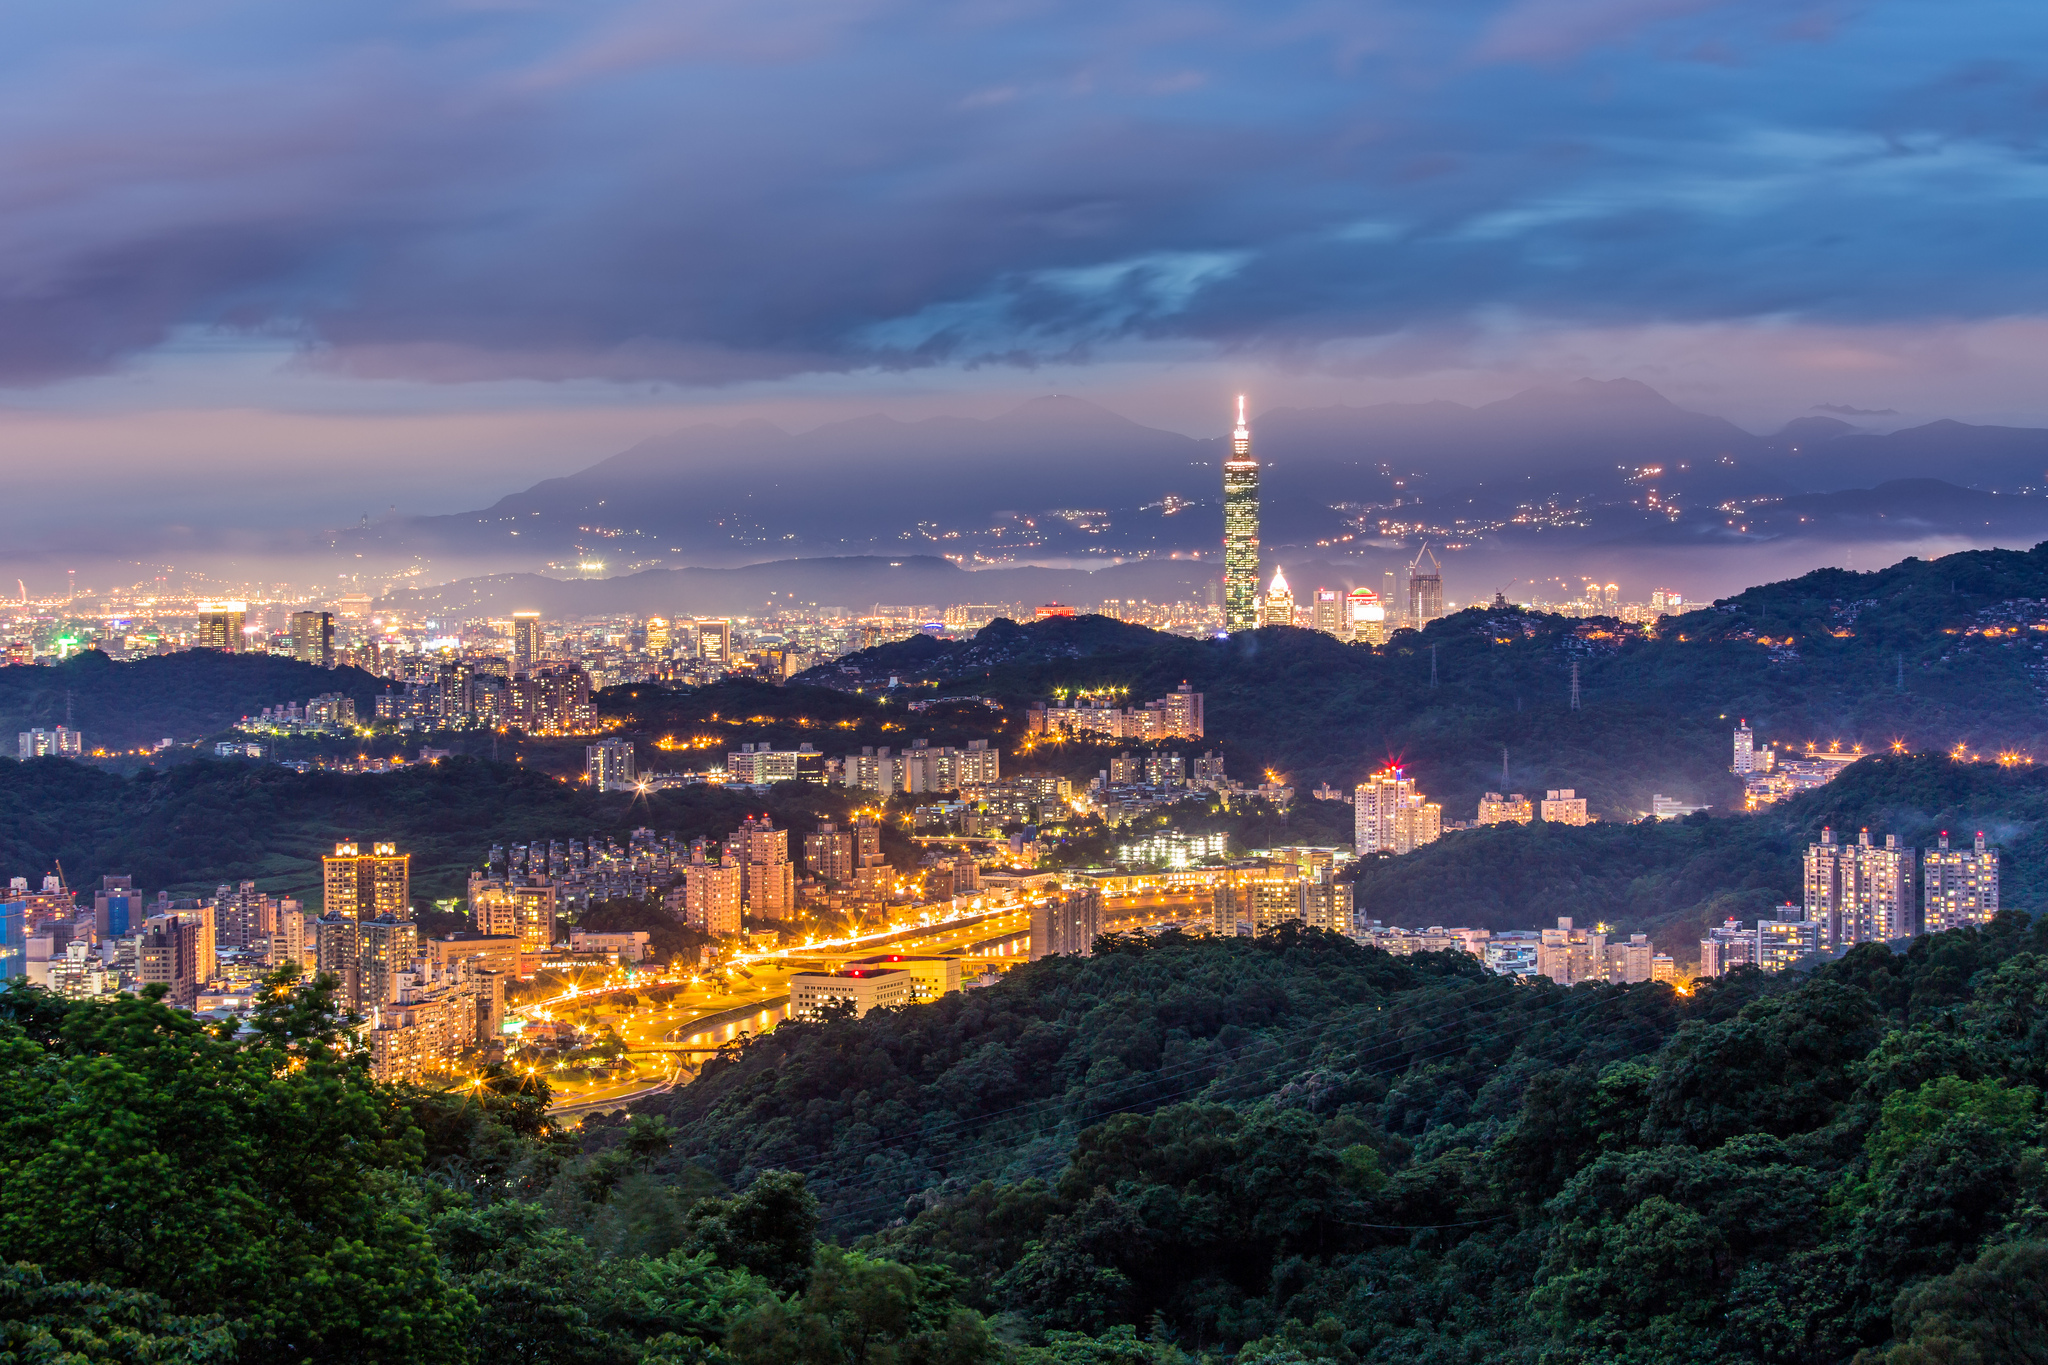 china, Taiwan, Taipei, City, Night, Dusk, Mountains, Hills, Trees, Blue, Blue, Sky, Clouds, Tower, Building, House, Lights, Lighting, Form, Height, Panorama Wallpaper